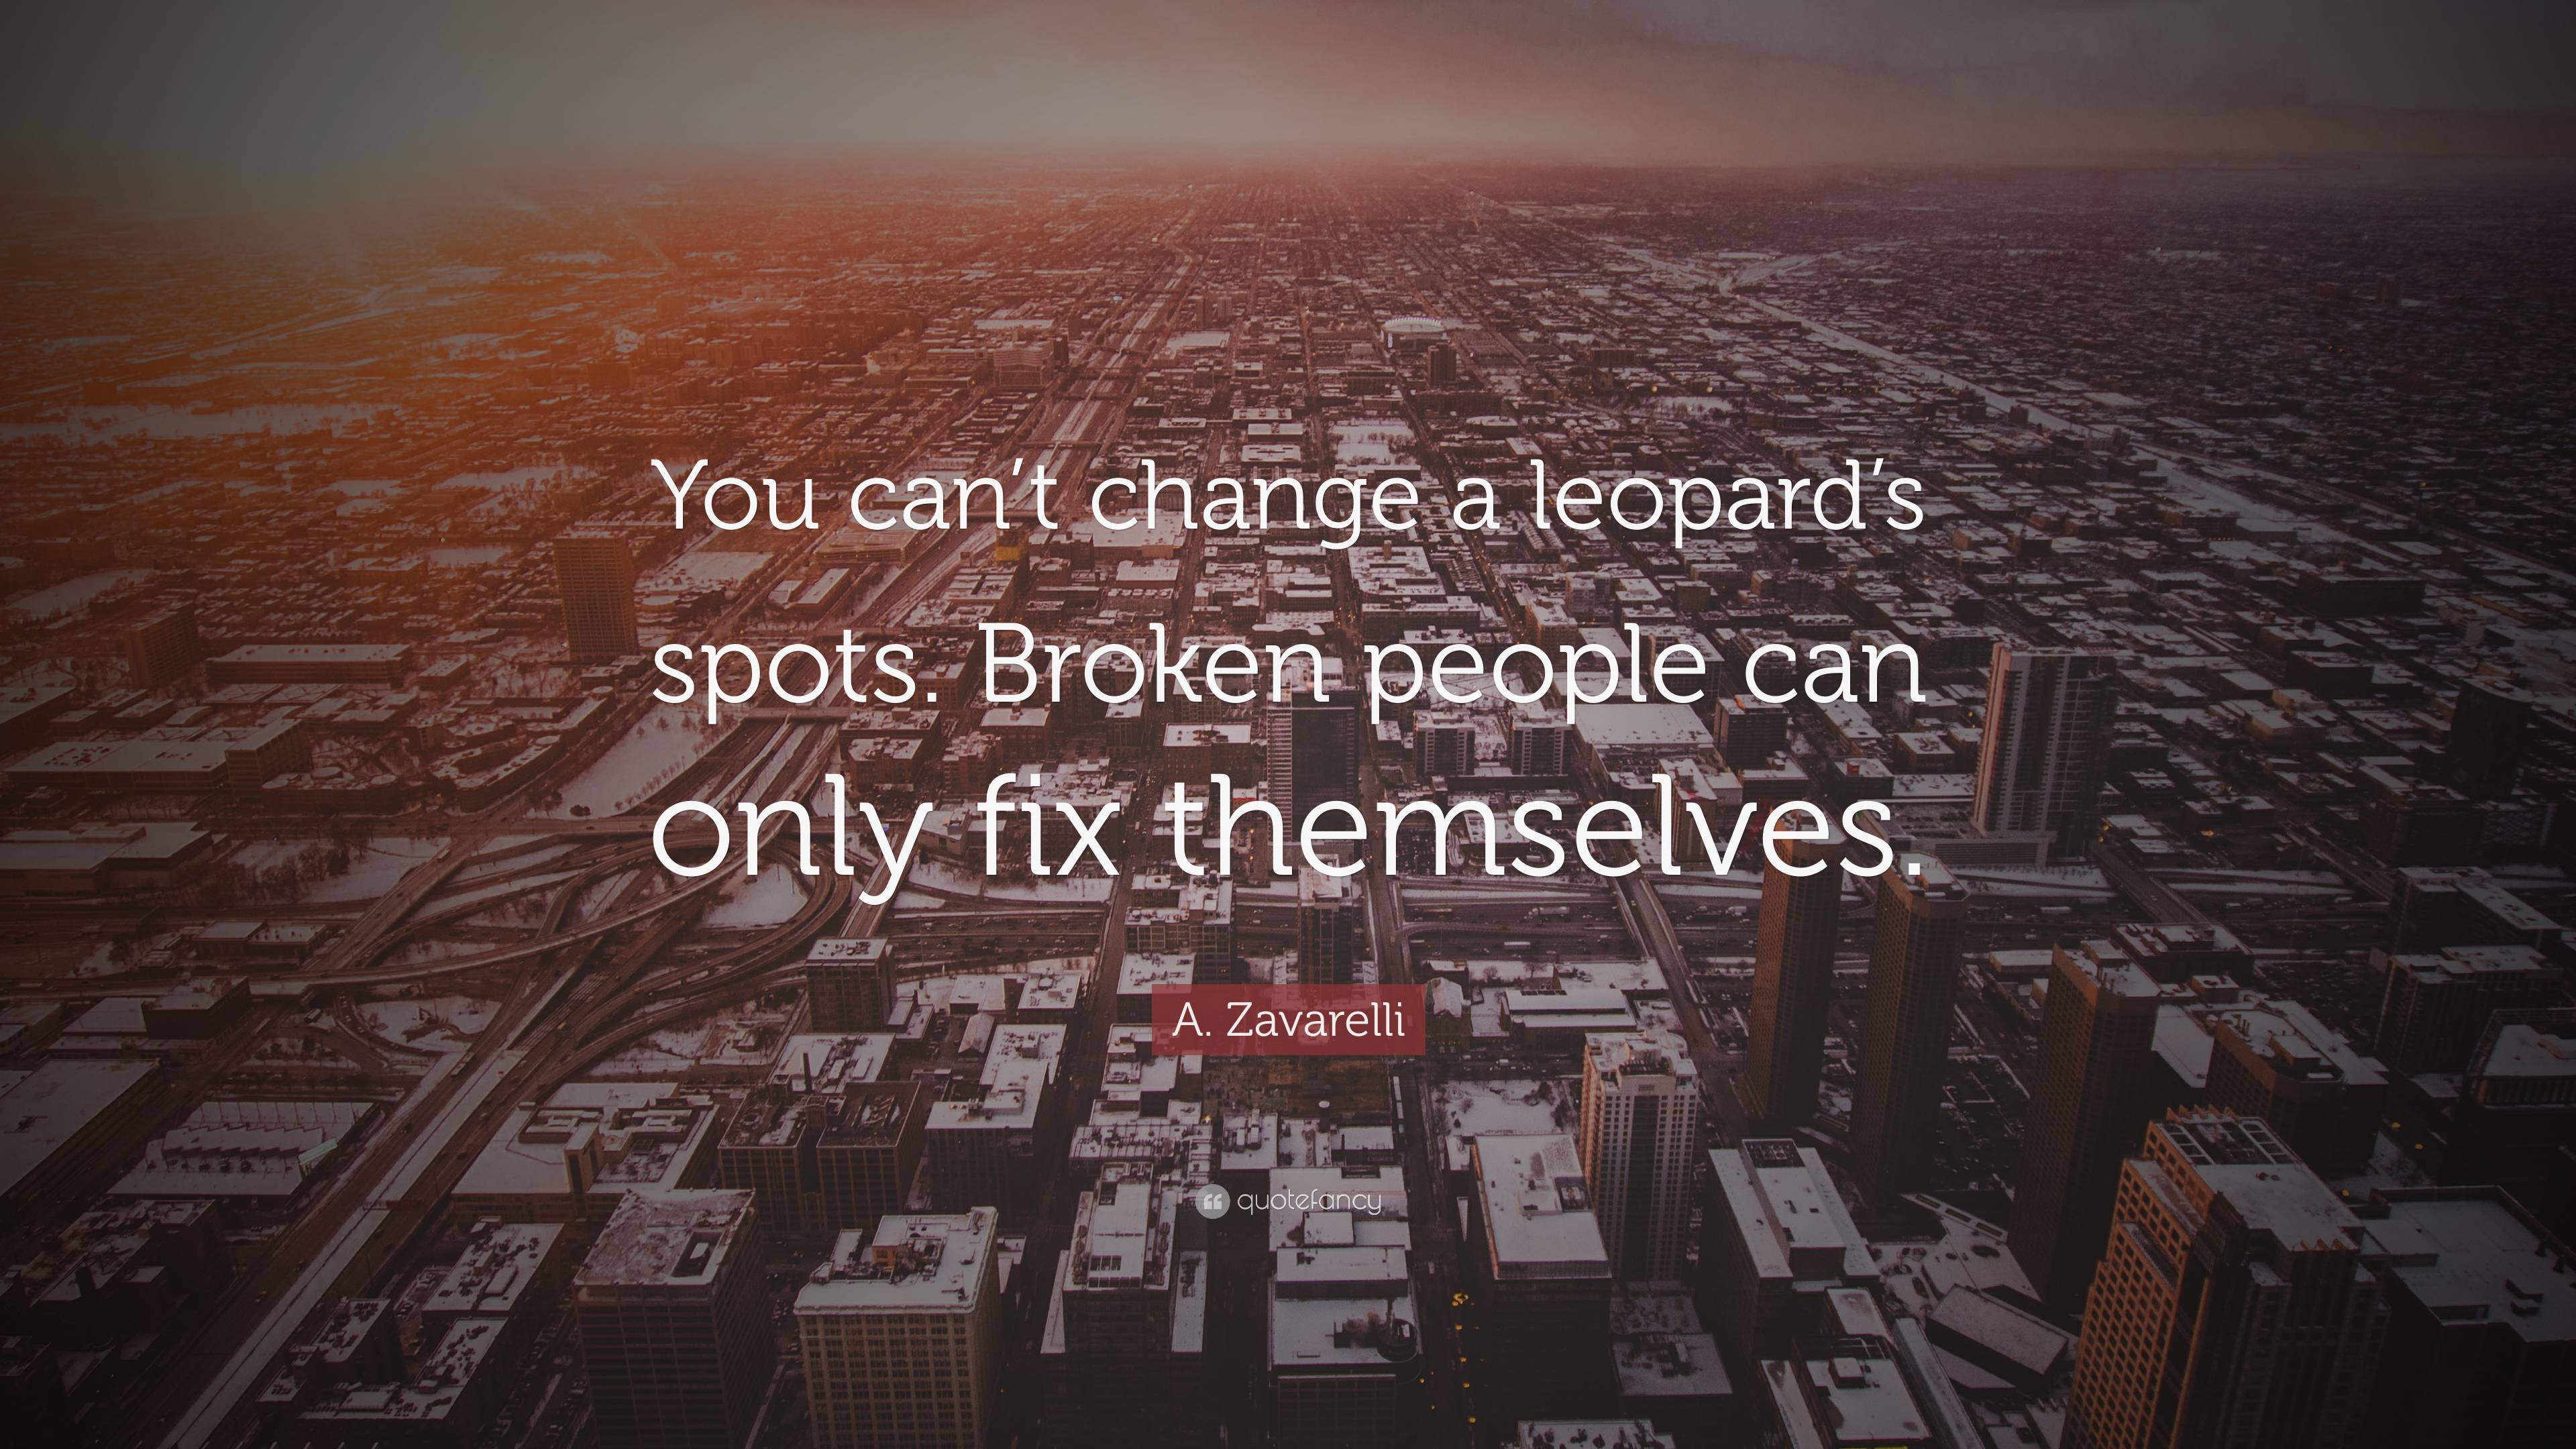 A. Zavarelli Quote: “You can't change a leopard's spots. Broken people can only fix themselves.”